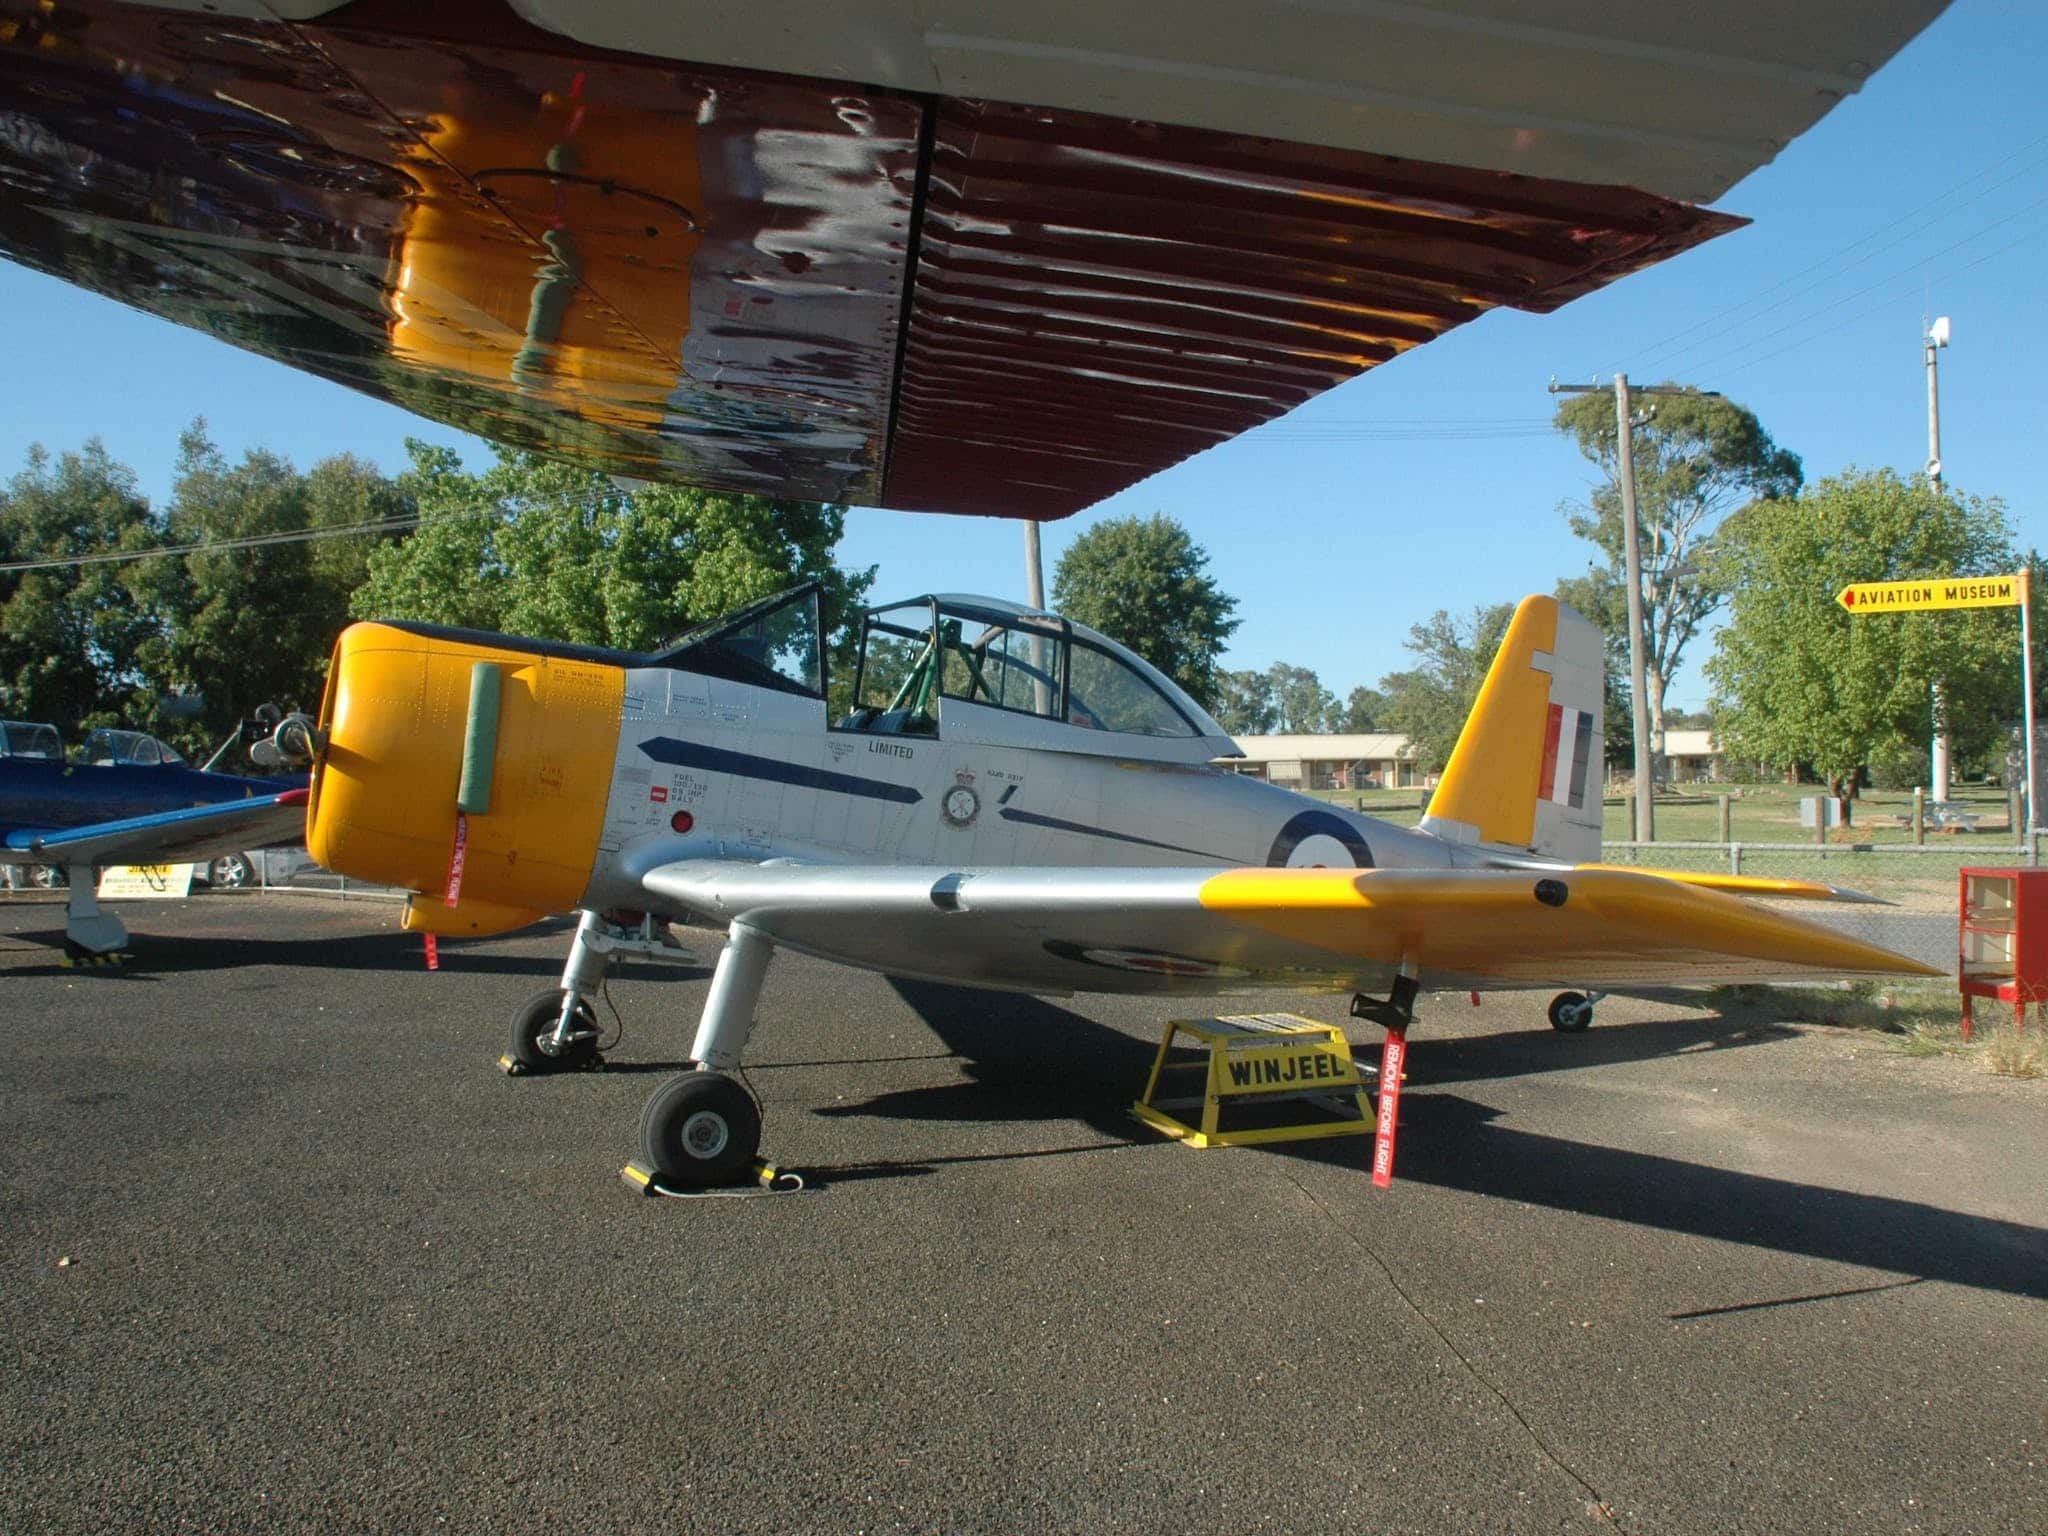 Benalla Aviation Museum and Men's Shed - Victoria's High Country